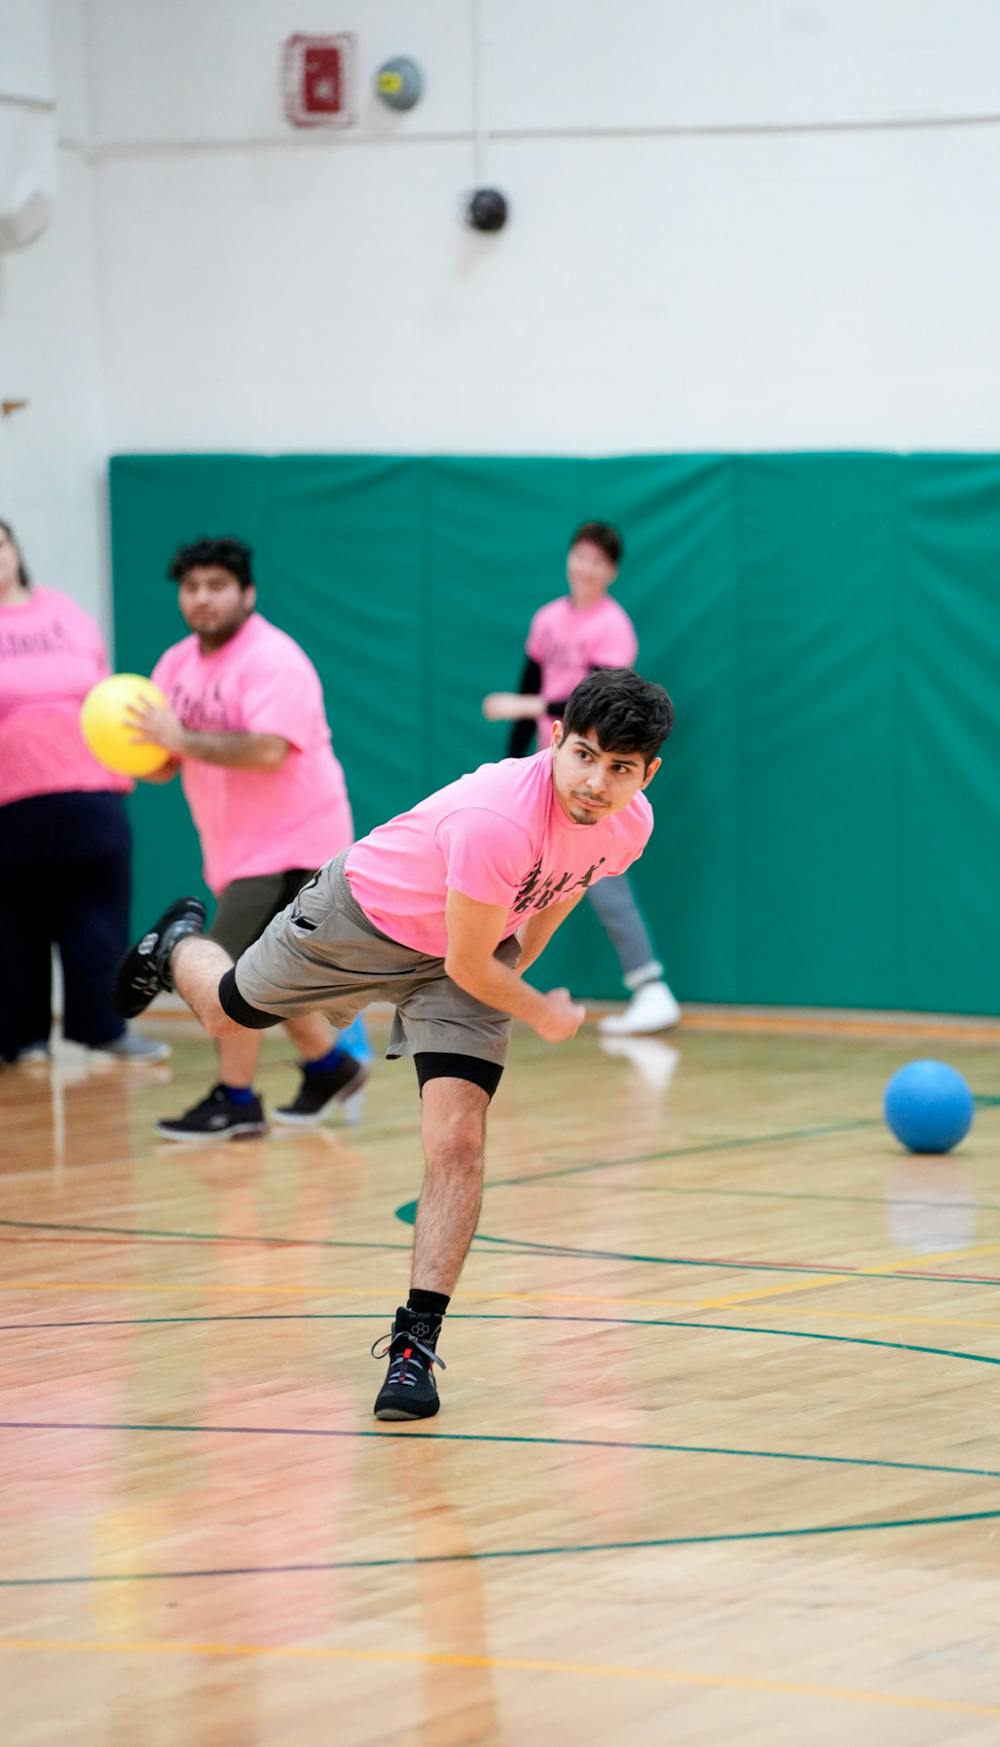 The new GAAY Sports League in East Lansing hosting dodgeball games at the Hannah Community Center on Feb. 5, 2023.